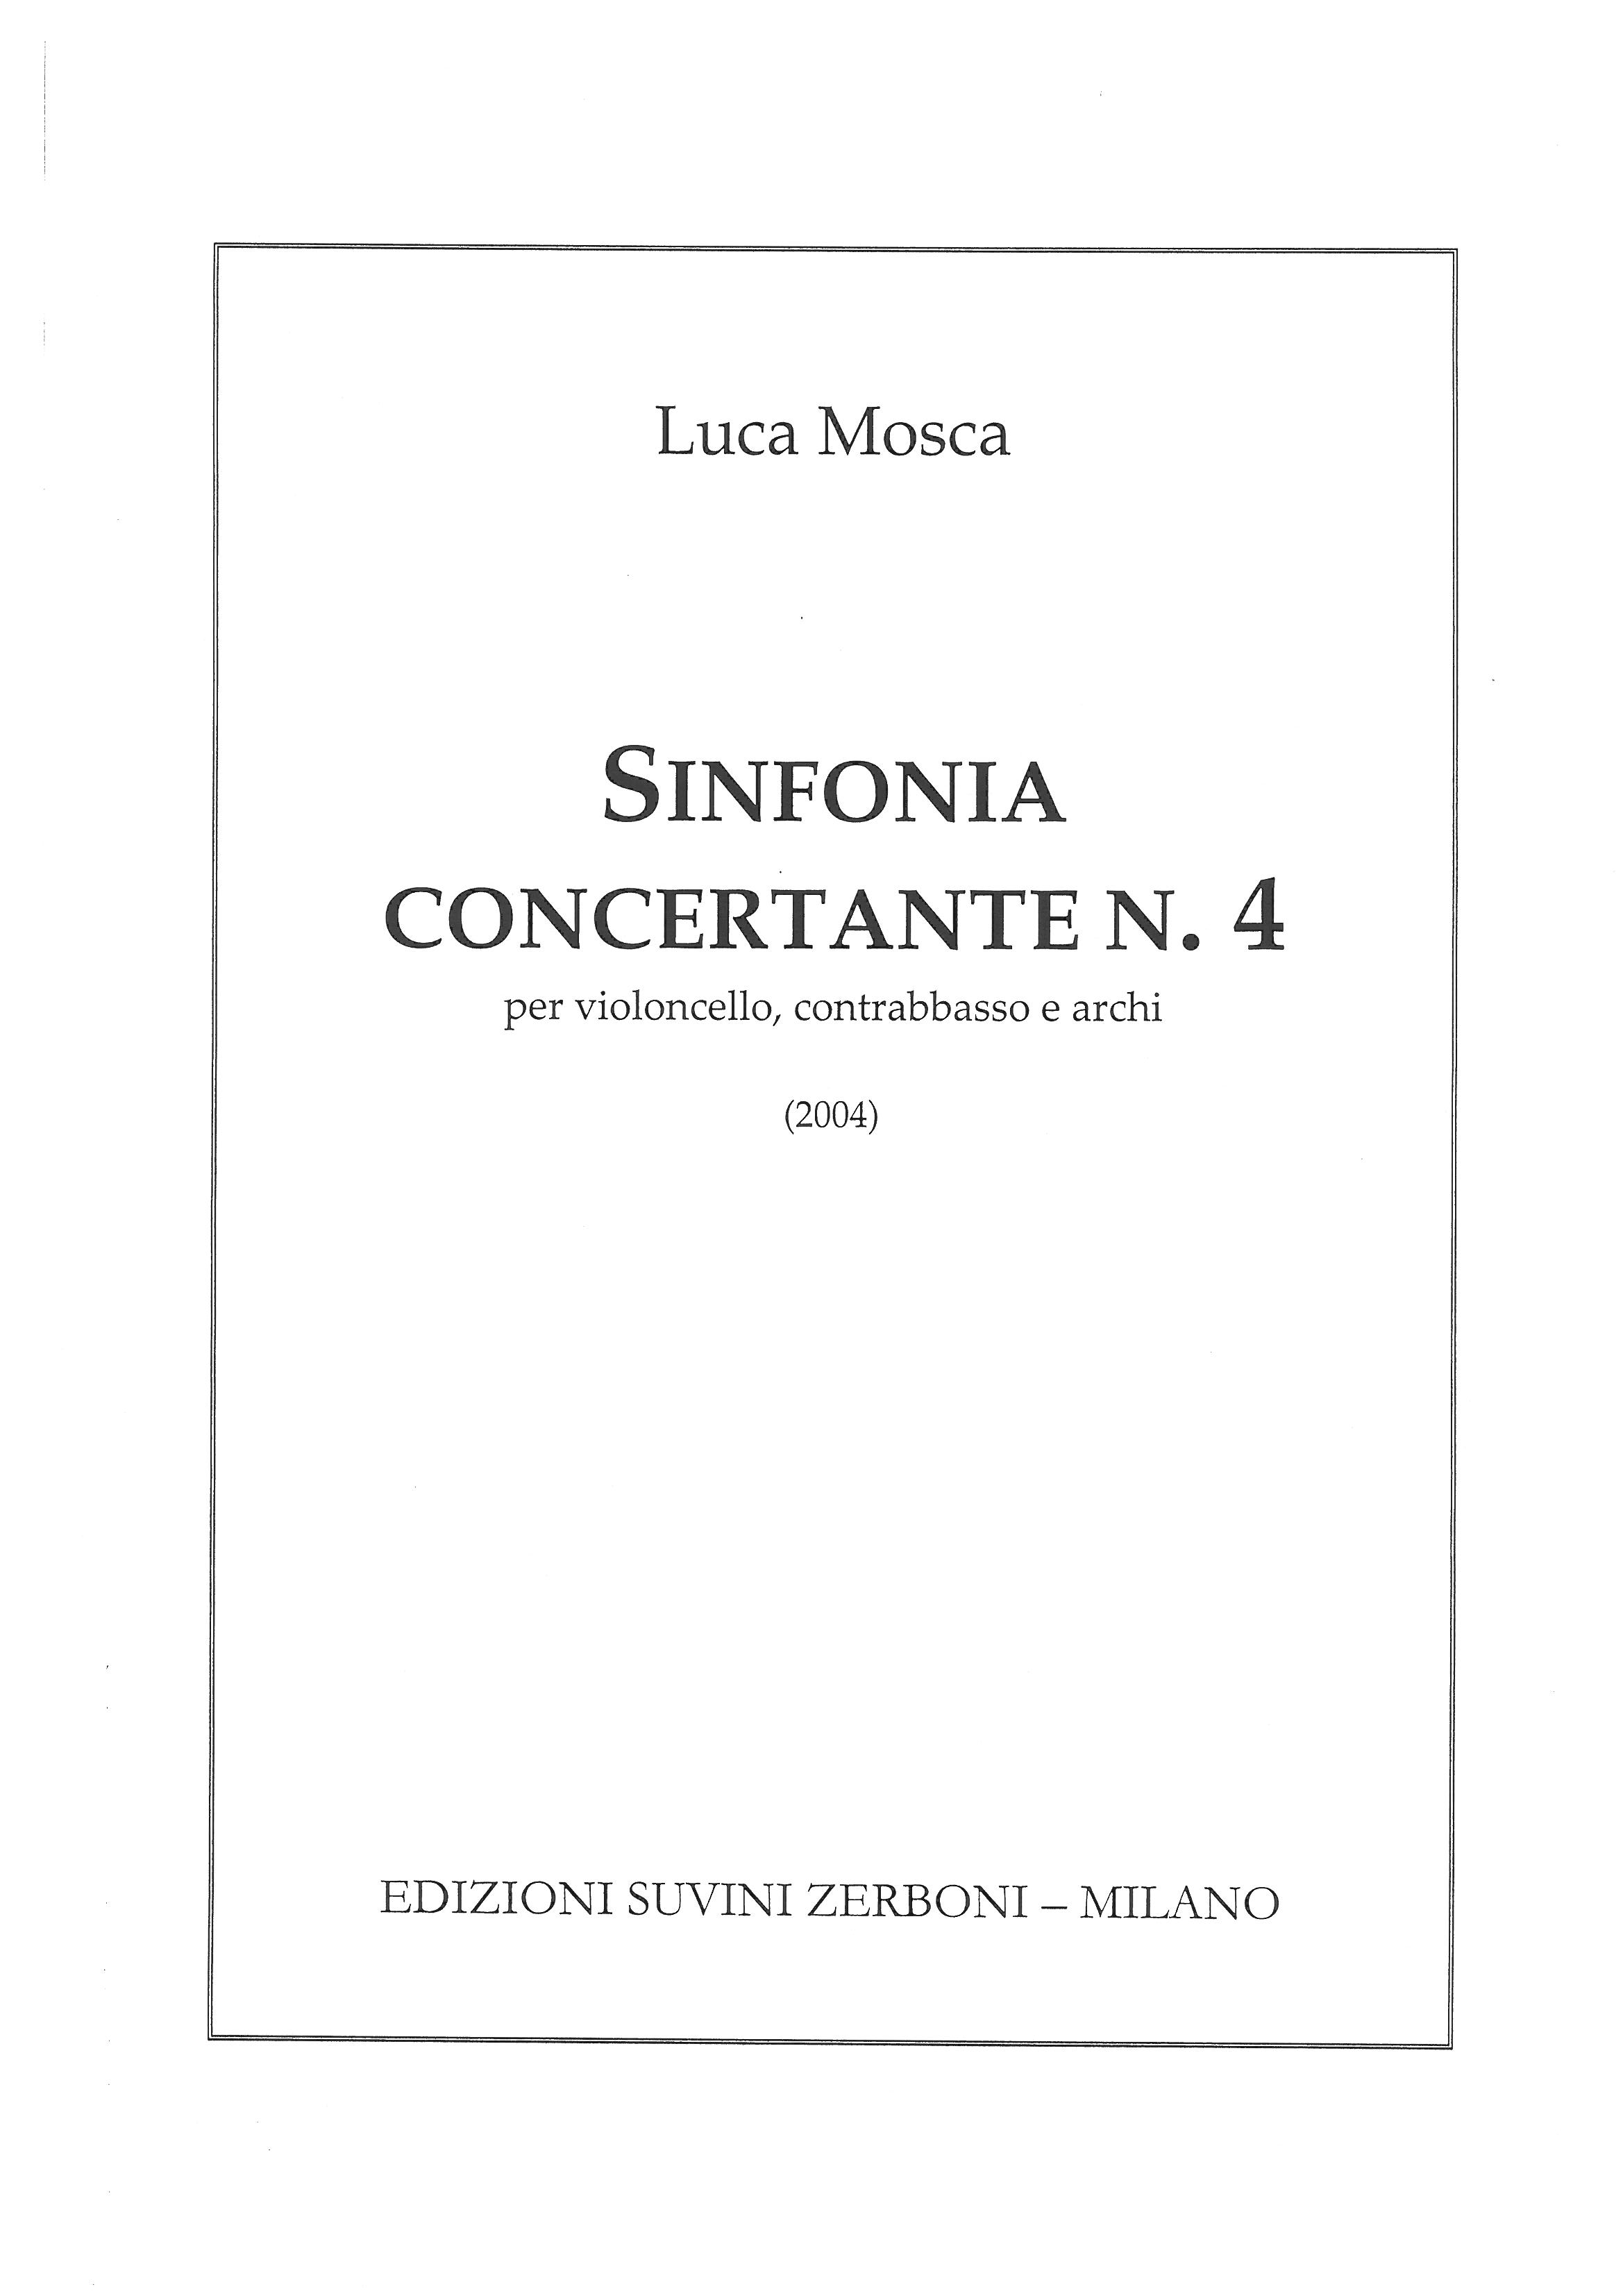 Sinfonia concertante n 4_Mosca 1 771